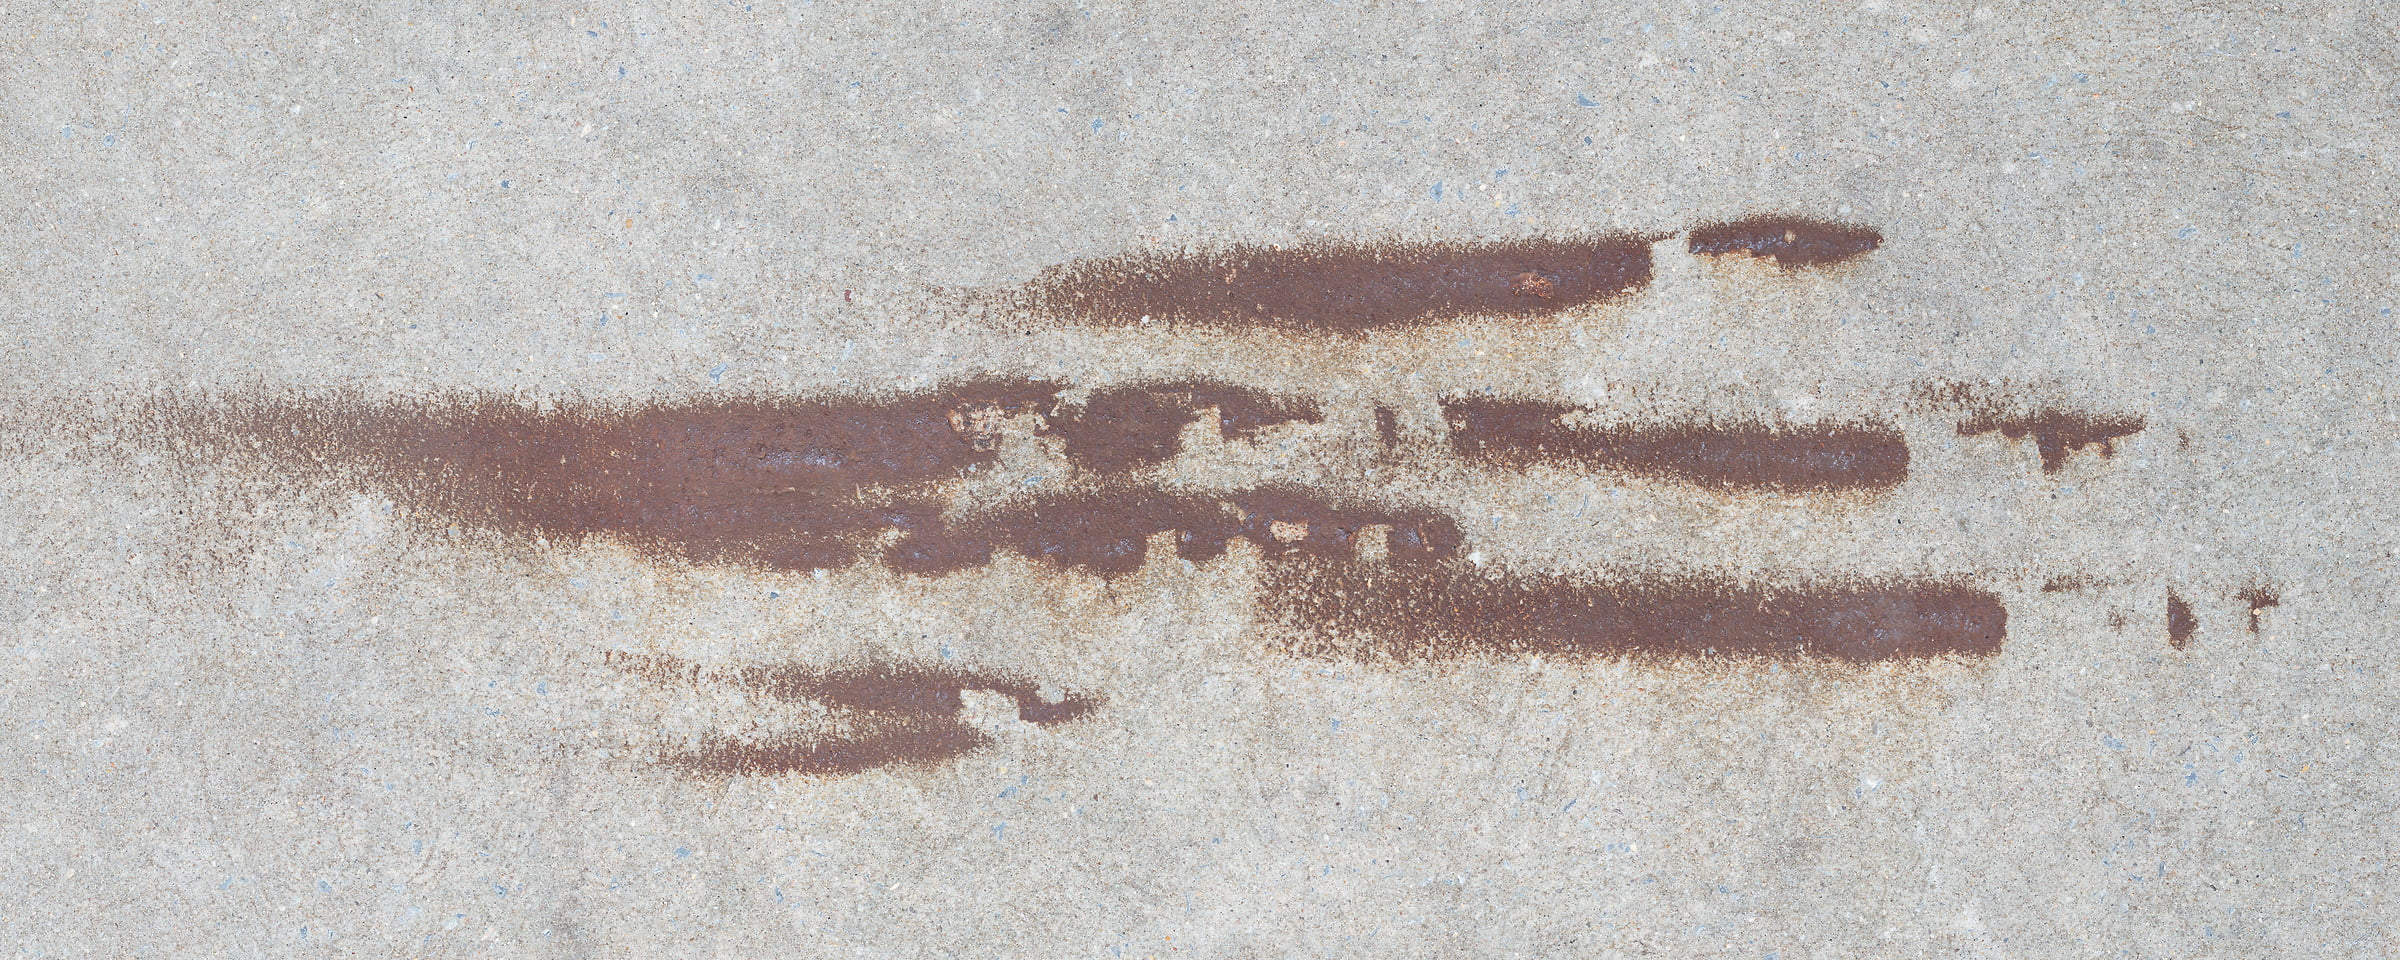 771 megapixels! A very high resolution, large-format VAST photo print of rust stains on sidewalks; fine art photograph created by Dan Piech in Manhattan, New York City